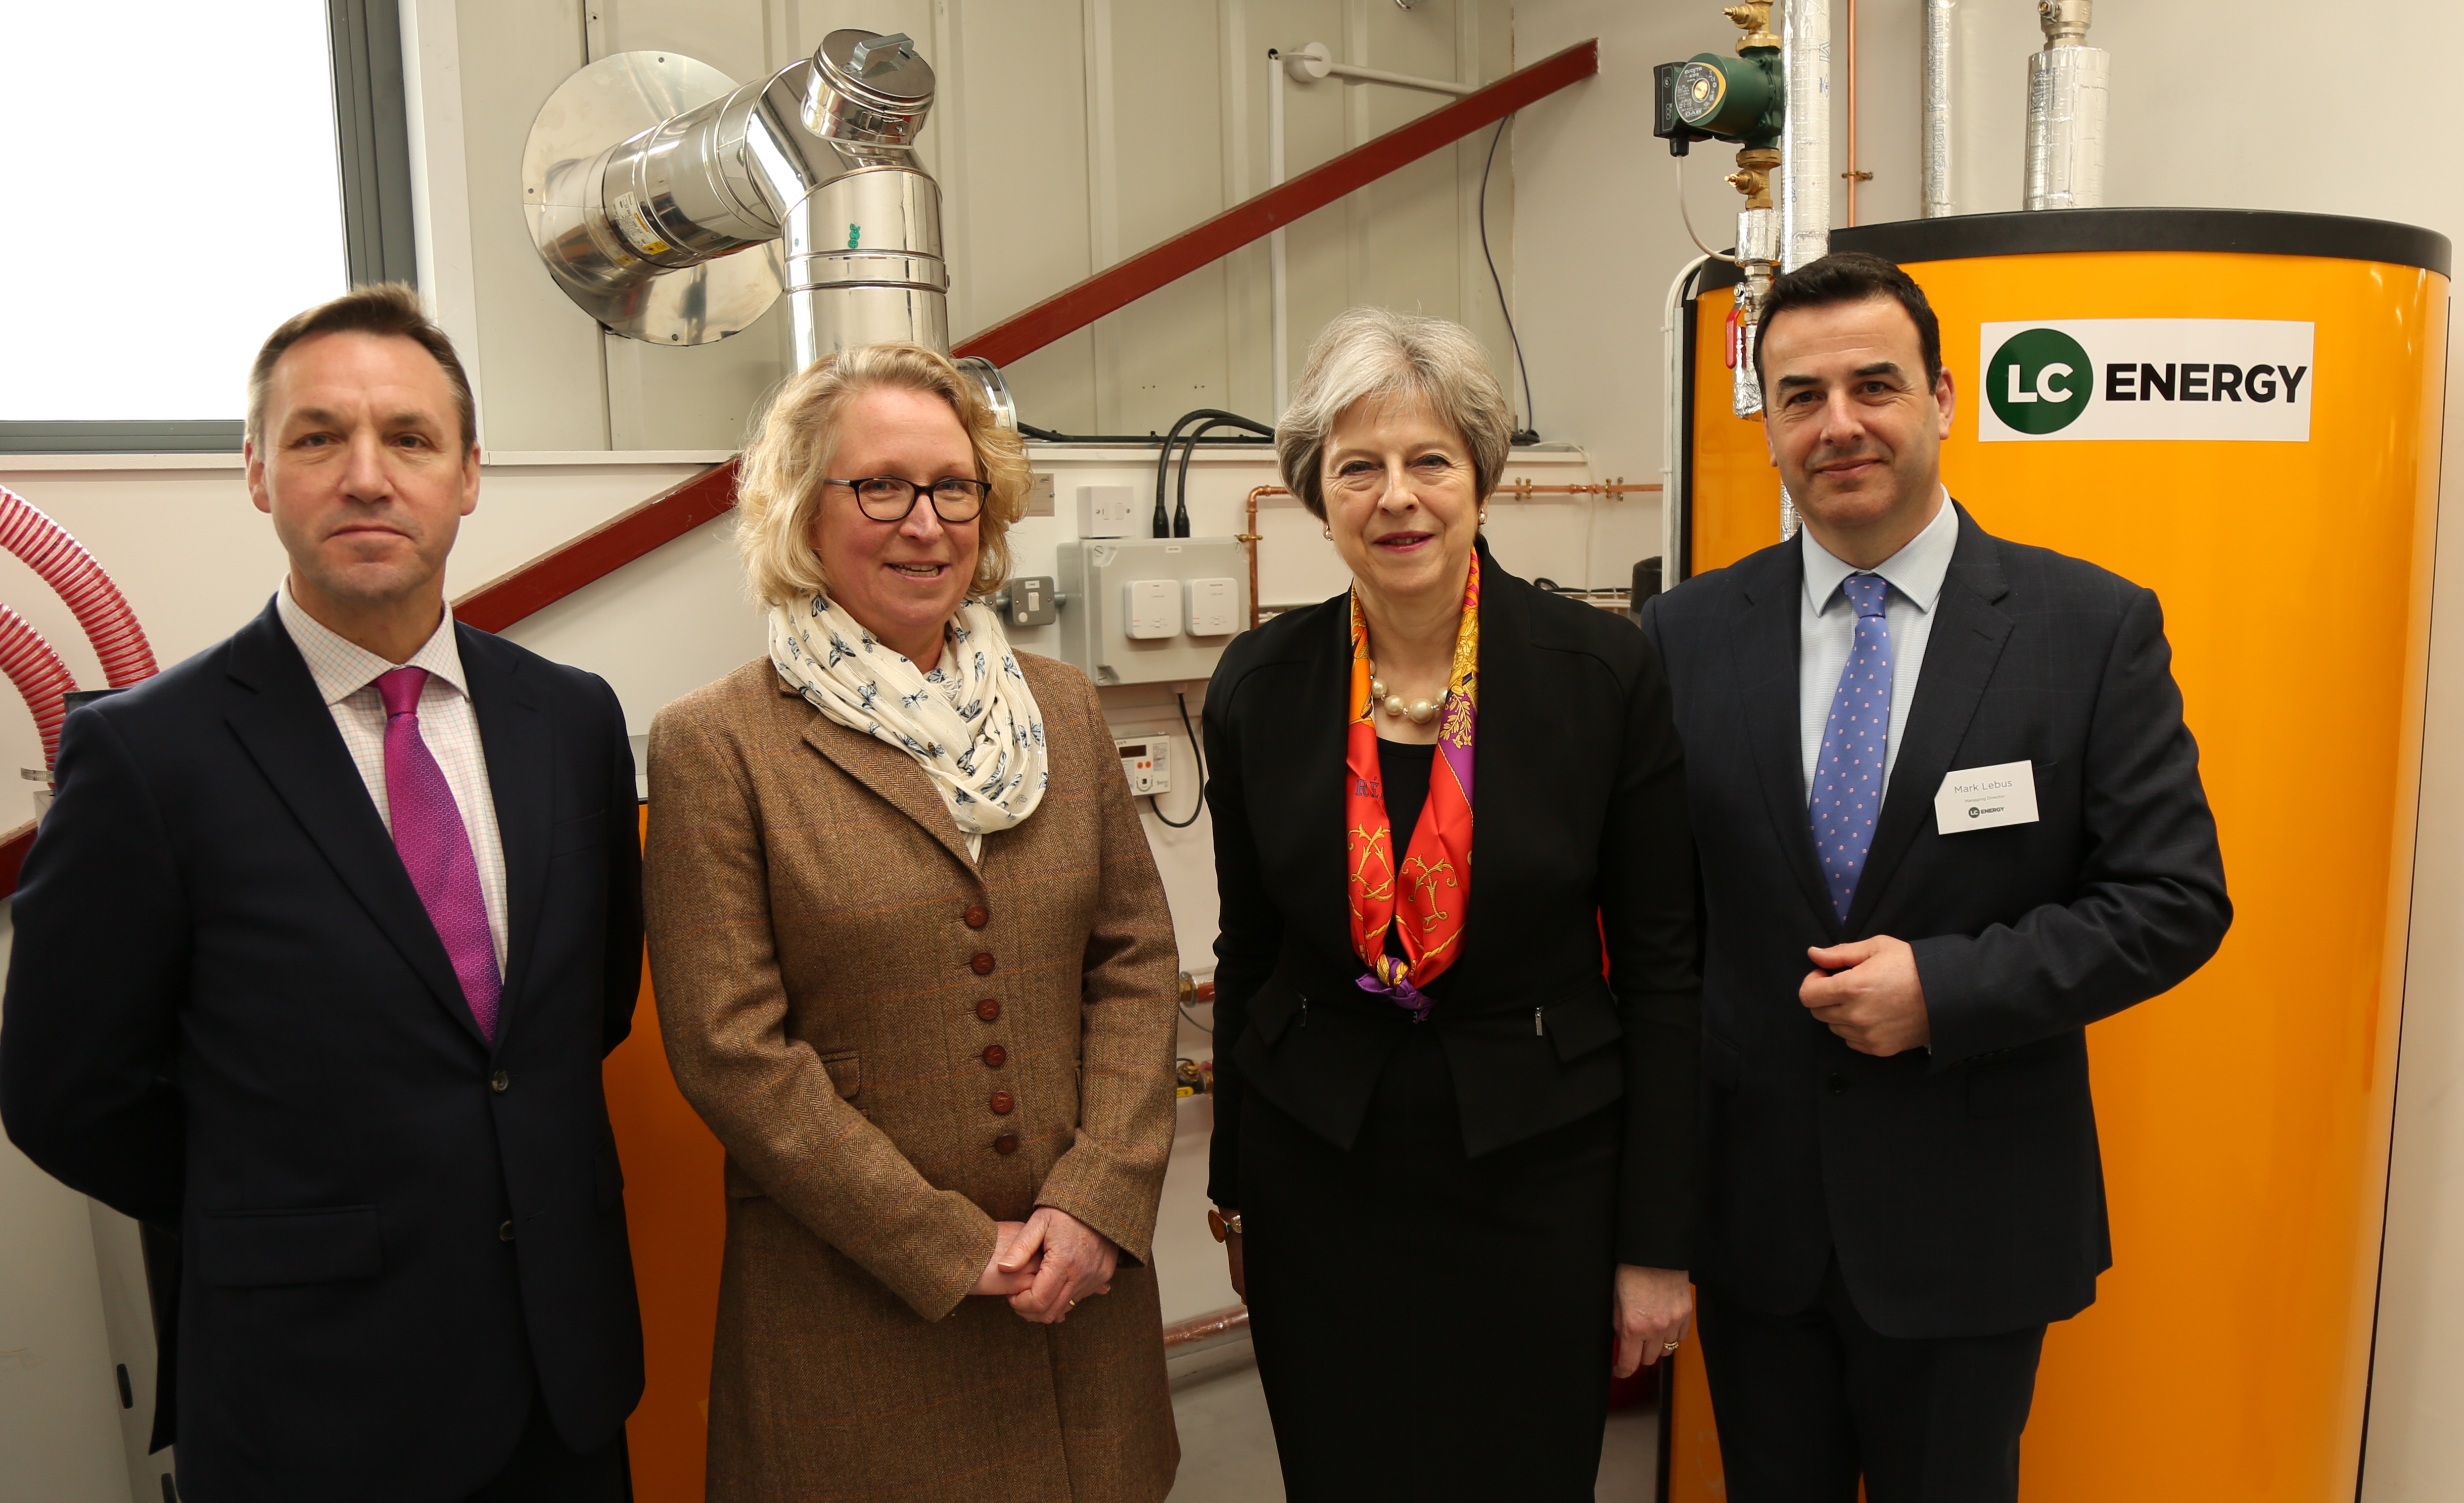 Theresa May opens the UK’s first biomass training facility at a further education college